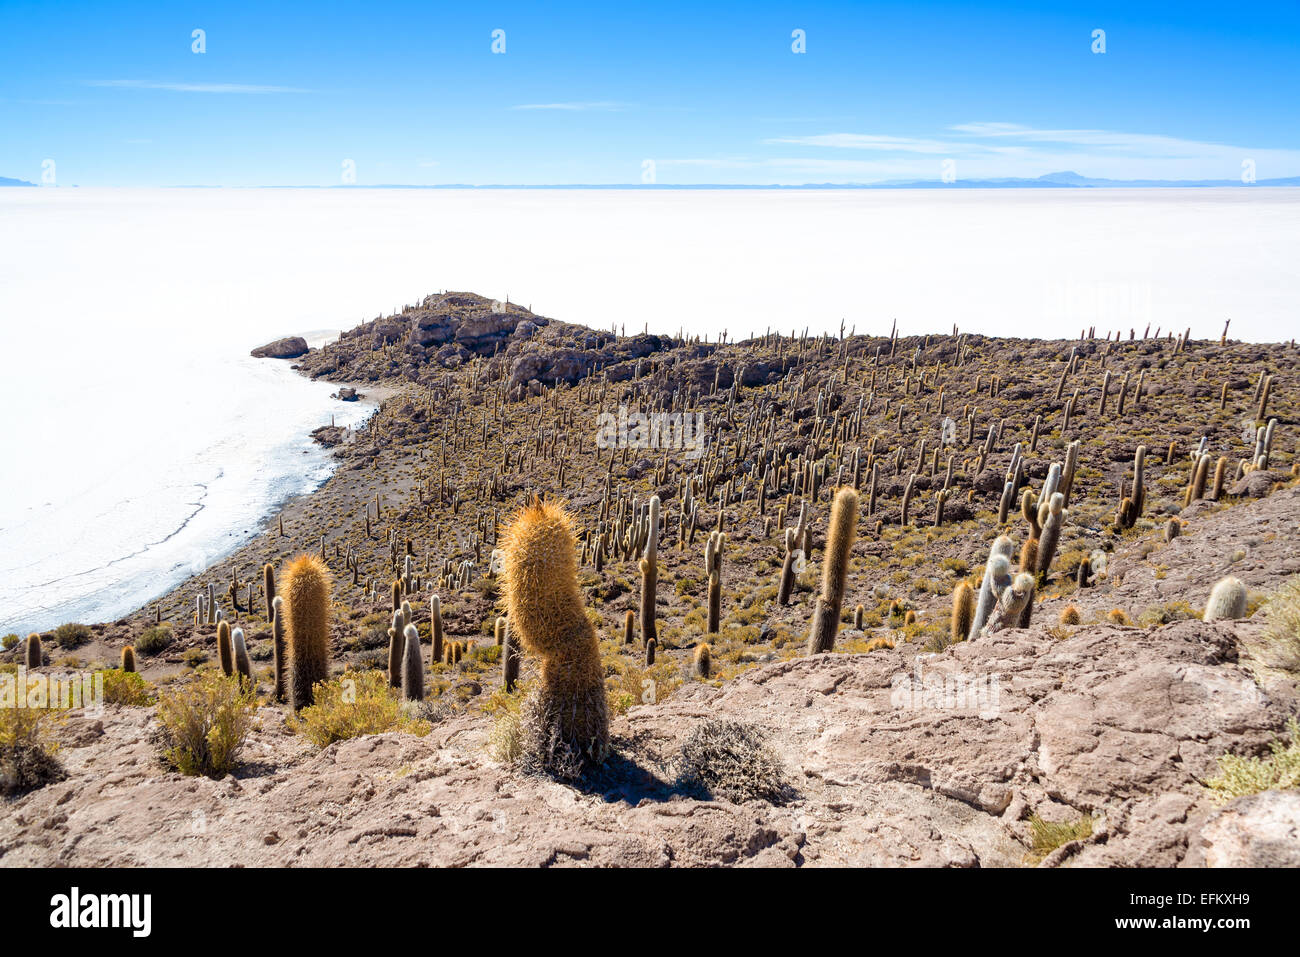 View of cactus covering Island Incahuasi with the Uyuni Salt Flats stretching out below in Bolivia Stock Photo